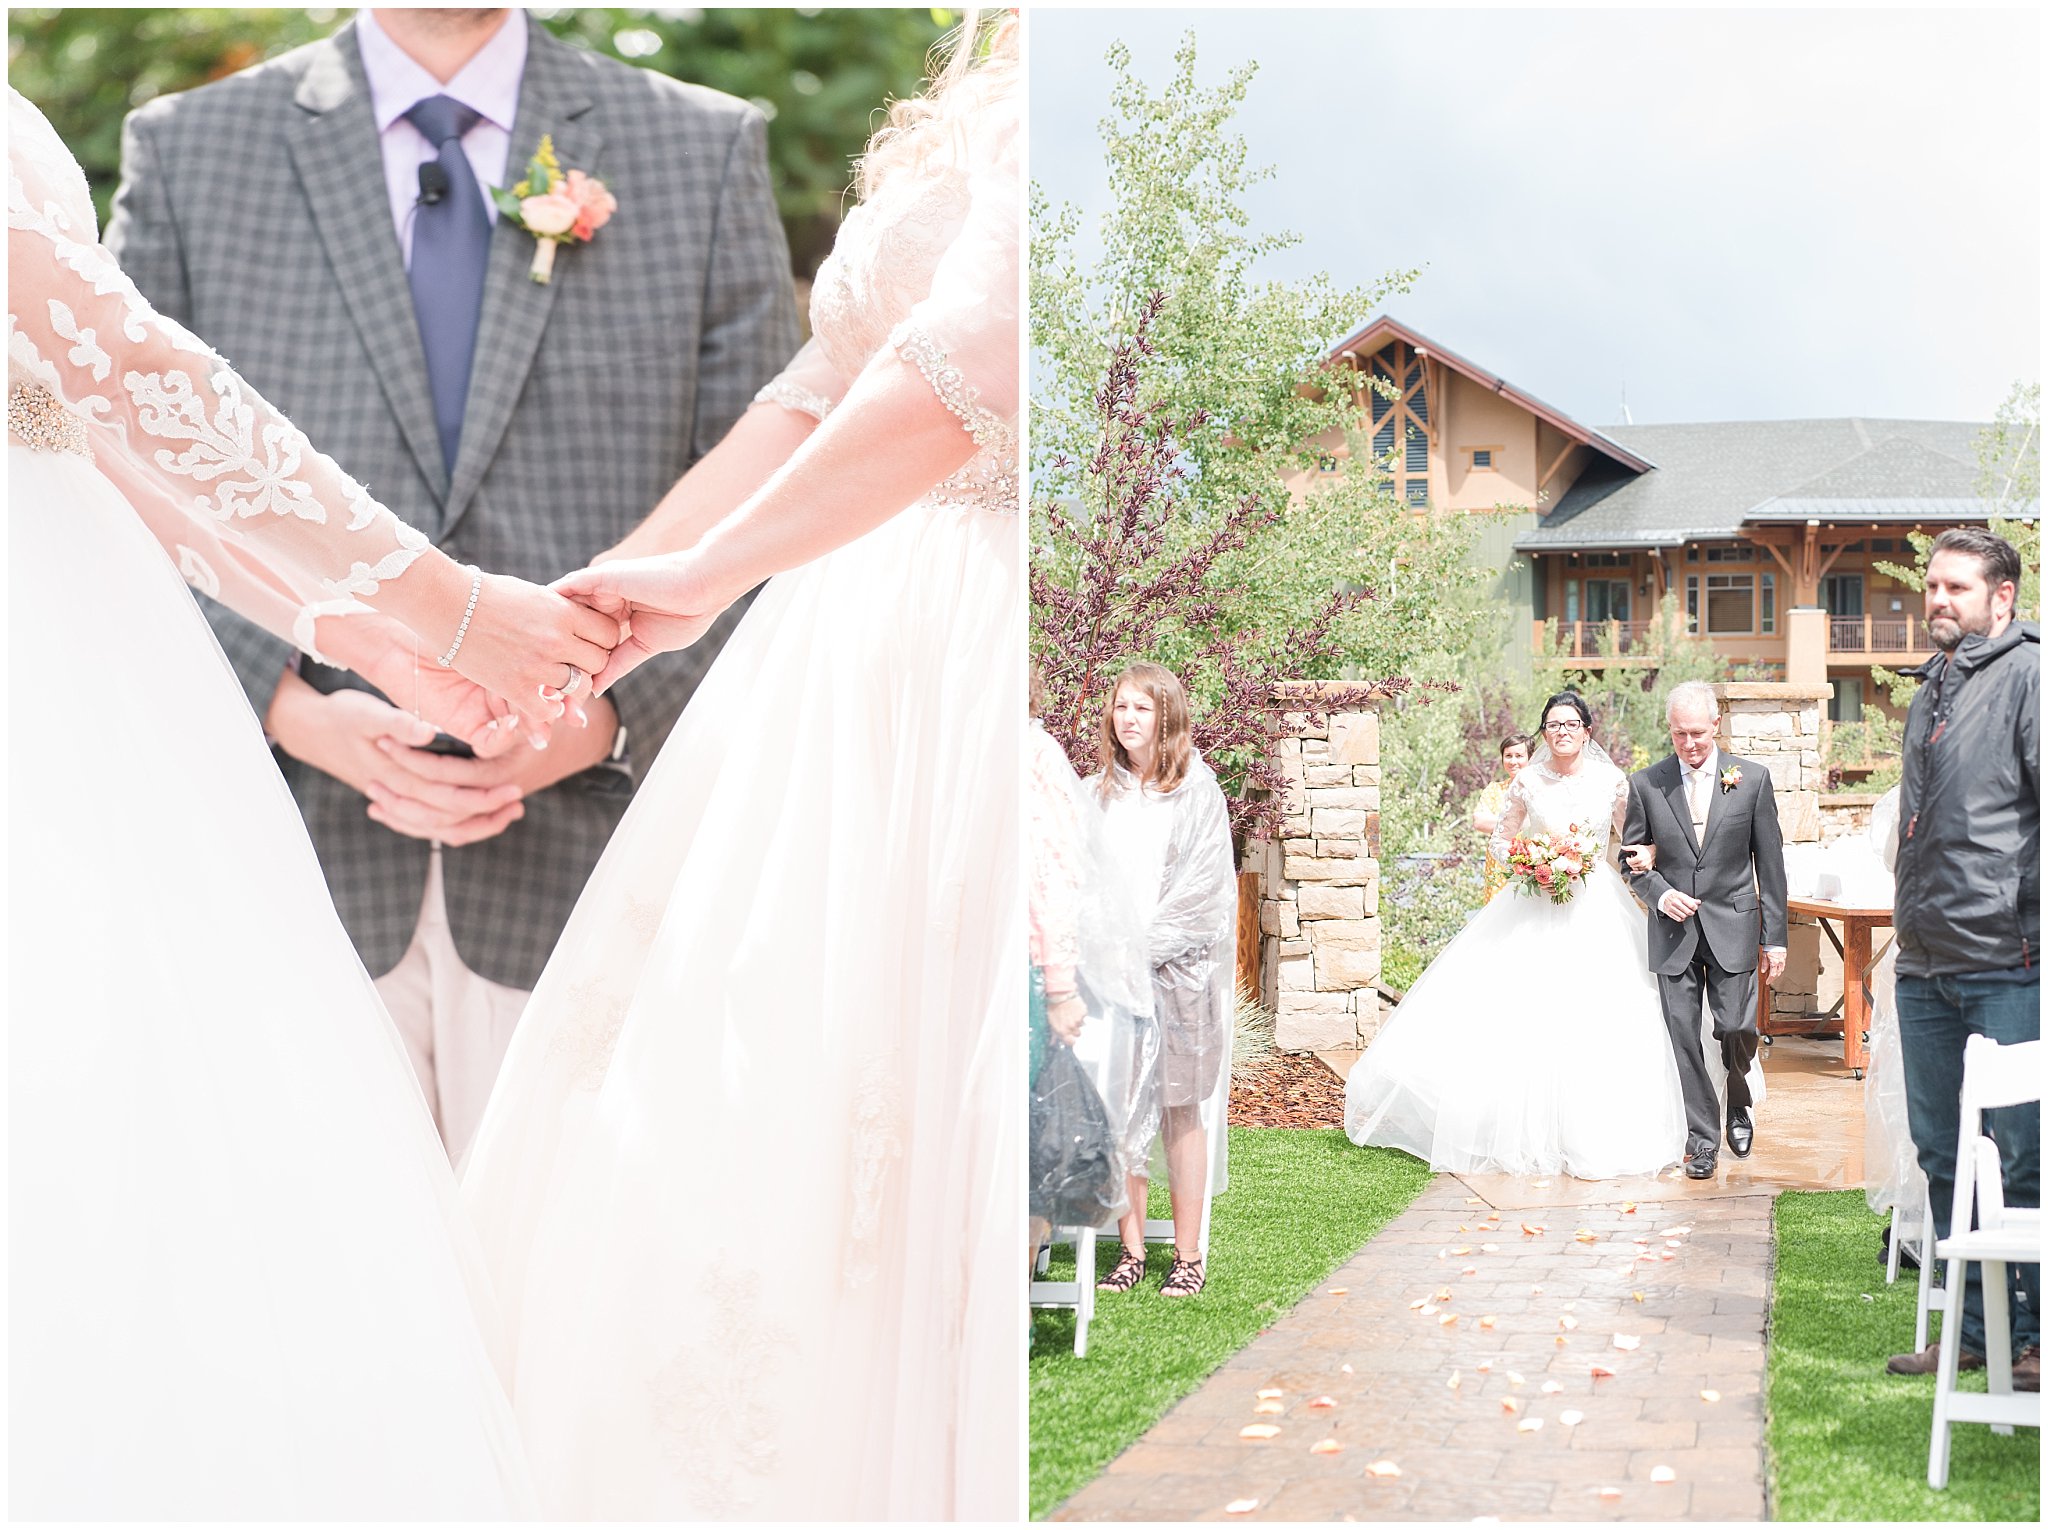 Butterfly wedding with sunset colors | Park City Wedding at the Hyatt Centric | Jessie and Dallin Photography